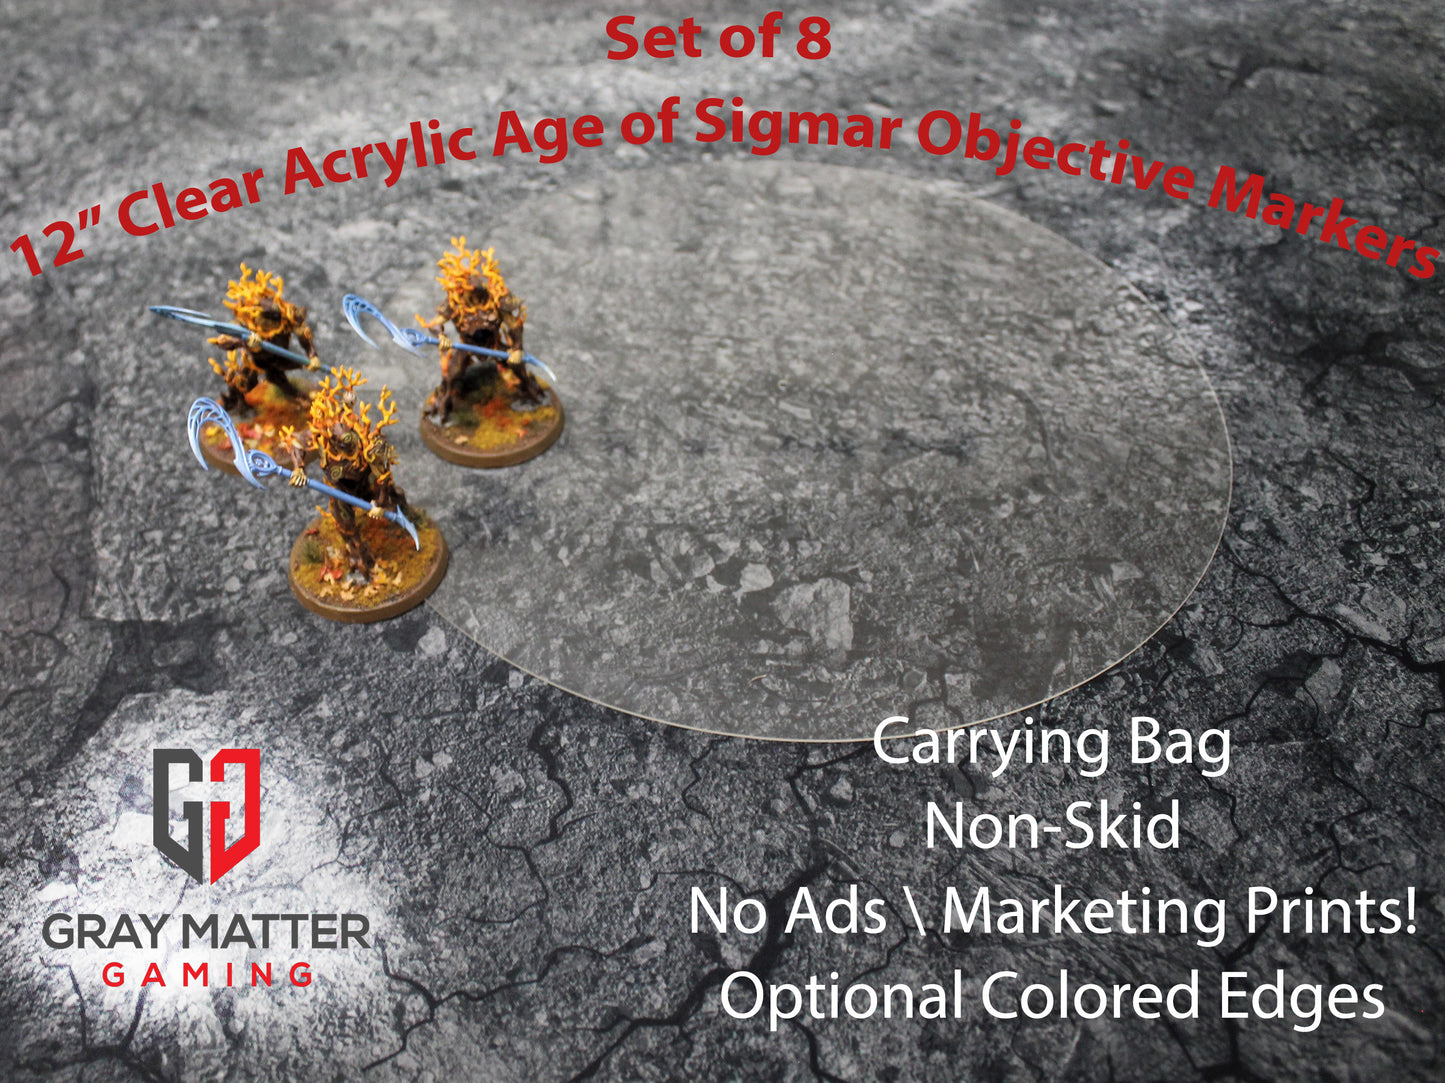 Warhammer AoS Objective Markers - Gamer's Club Edition - 5 Sets - Age of Sigmar